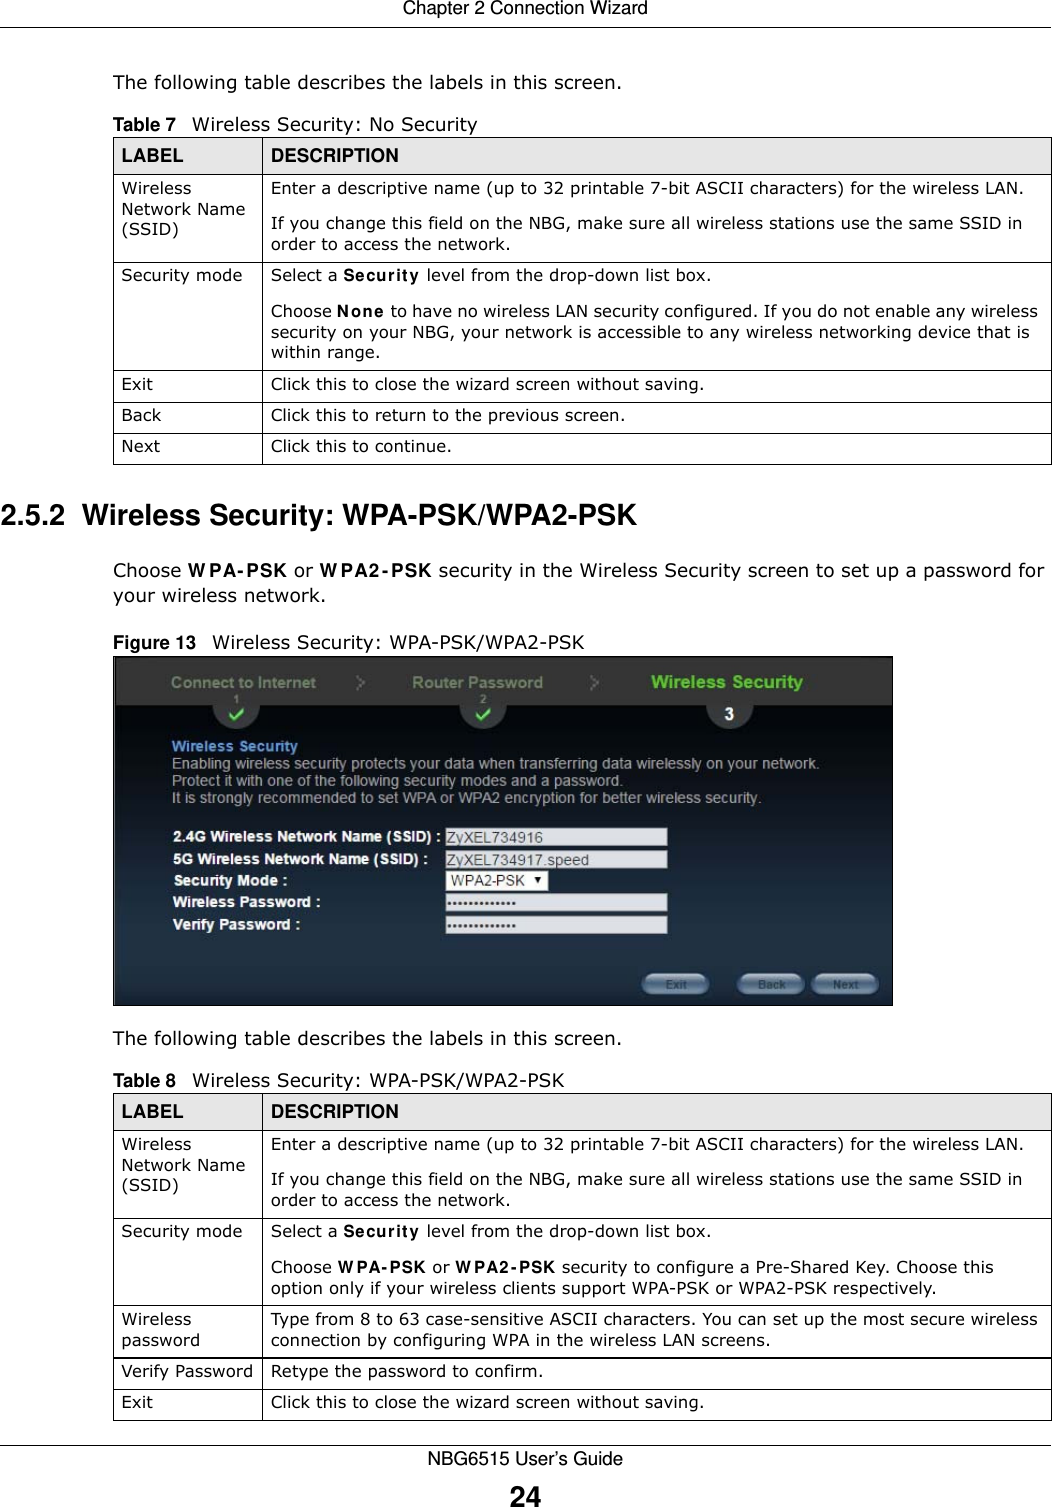 Chapter 2 Connection WizardNBG6515 User’s Guide24The following table describes the labels in this screen.2.5.2  Wireless Security: WPA-PSK/WPA2-PSKChoose WPA-PSK or WPA2-PSK security in the Wireless Security screen to set up a password for your wireless network.Figure 13   Wireless Security: WPA-PSK/WPA2-PSKThe following table describes the labels in this screen. Table 7   Wireless Security: No SecurityLABEL DESCRIPTIONWireless Network Name (SSID)Enter a descriptive name (up to 32 printable 7-bit ASCII characters) for the wireless LAN. If you change this field on the NBG, make sure all wireless stations use the same SSID in order to access the network. Security mode Select a Security level from the drop-down list box. Choose None to have no wireless LAN security configured. If you do not enable any wireless security on your NBG, your network is accessible to any wireless networking device that is within range. Exit Click this to close the wizard screen without saving.Back Click this to return to the previous screen.Next Click this to continue. Table 8   Wireless Security: WPA-PSK/WPA2-PSKLABEL DESCRIPTIONWireless Network Name (SSID)Enter a descriptive name (up to 32 printable 7-bit ASCII characters) for the wireless LAN. If you change this field on the NBG, make sure all wireless stations use the same SSID in order to access the network. Security mode Select a Security level from the drop-down list box.Choose WPA-PSK or WPA2-PSK security to configure a Pre-Shared Key. Choose this option only if your wireless clients support WPA-PSK or WPA2-PSK respectively.Wireless passwordType from 8 to 63 case-sensitive ASCII characters. You can set up the most secure wireless connection by configuring WPA in the wireless LAN screens.Verify Password Retype the password to confirm.Exit Click this to close the wizard screen without saving.